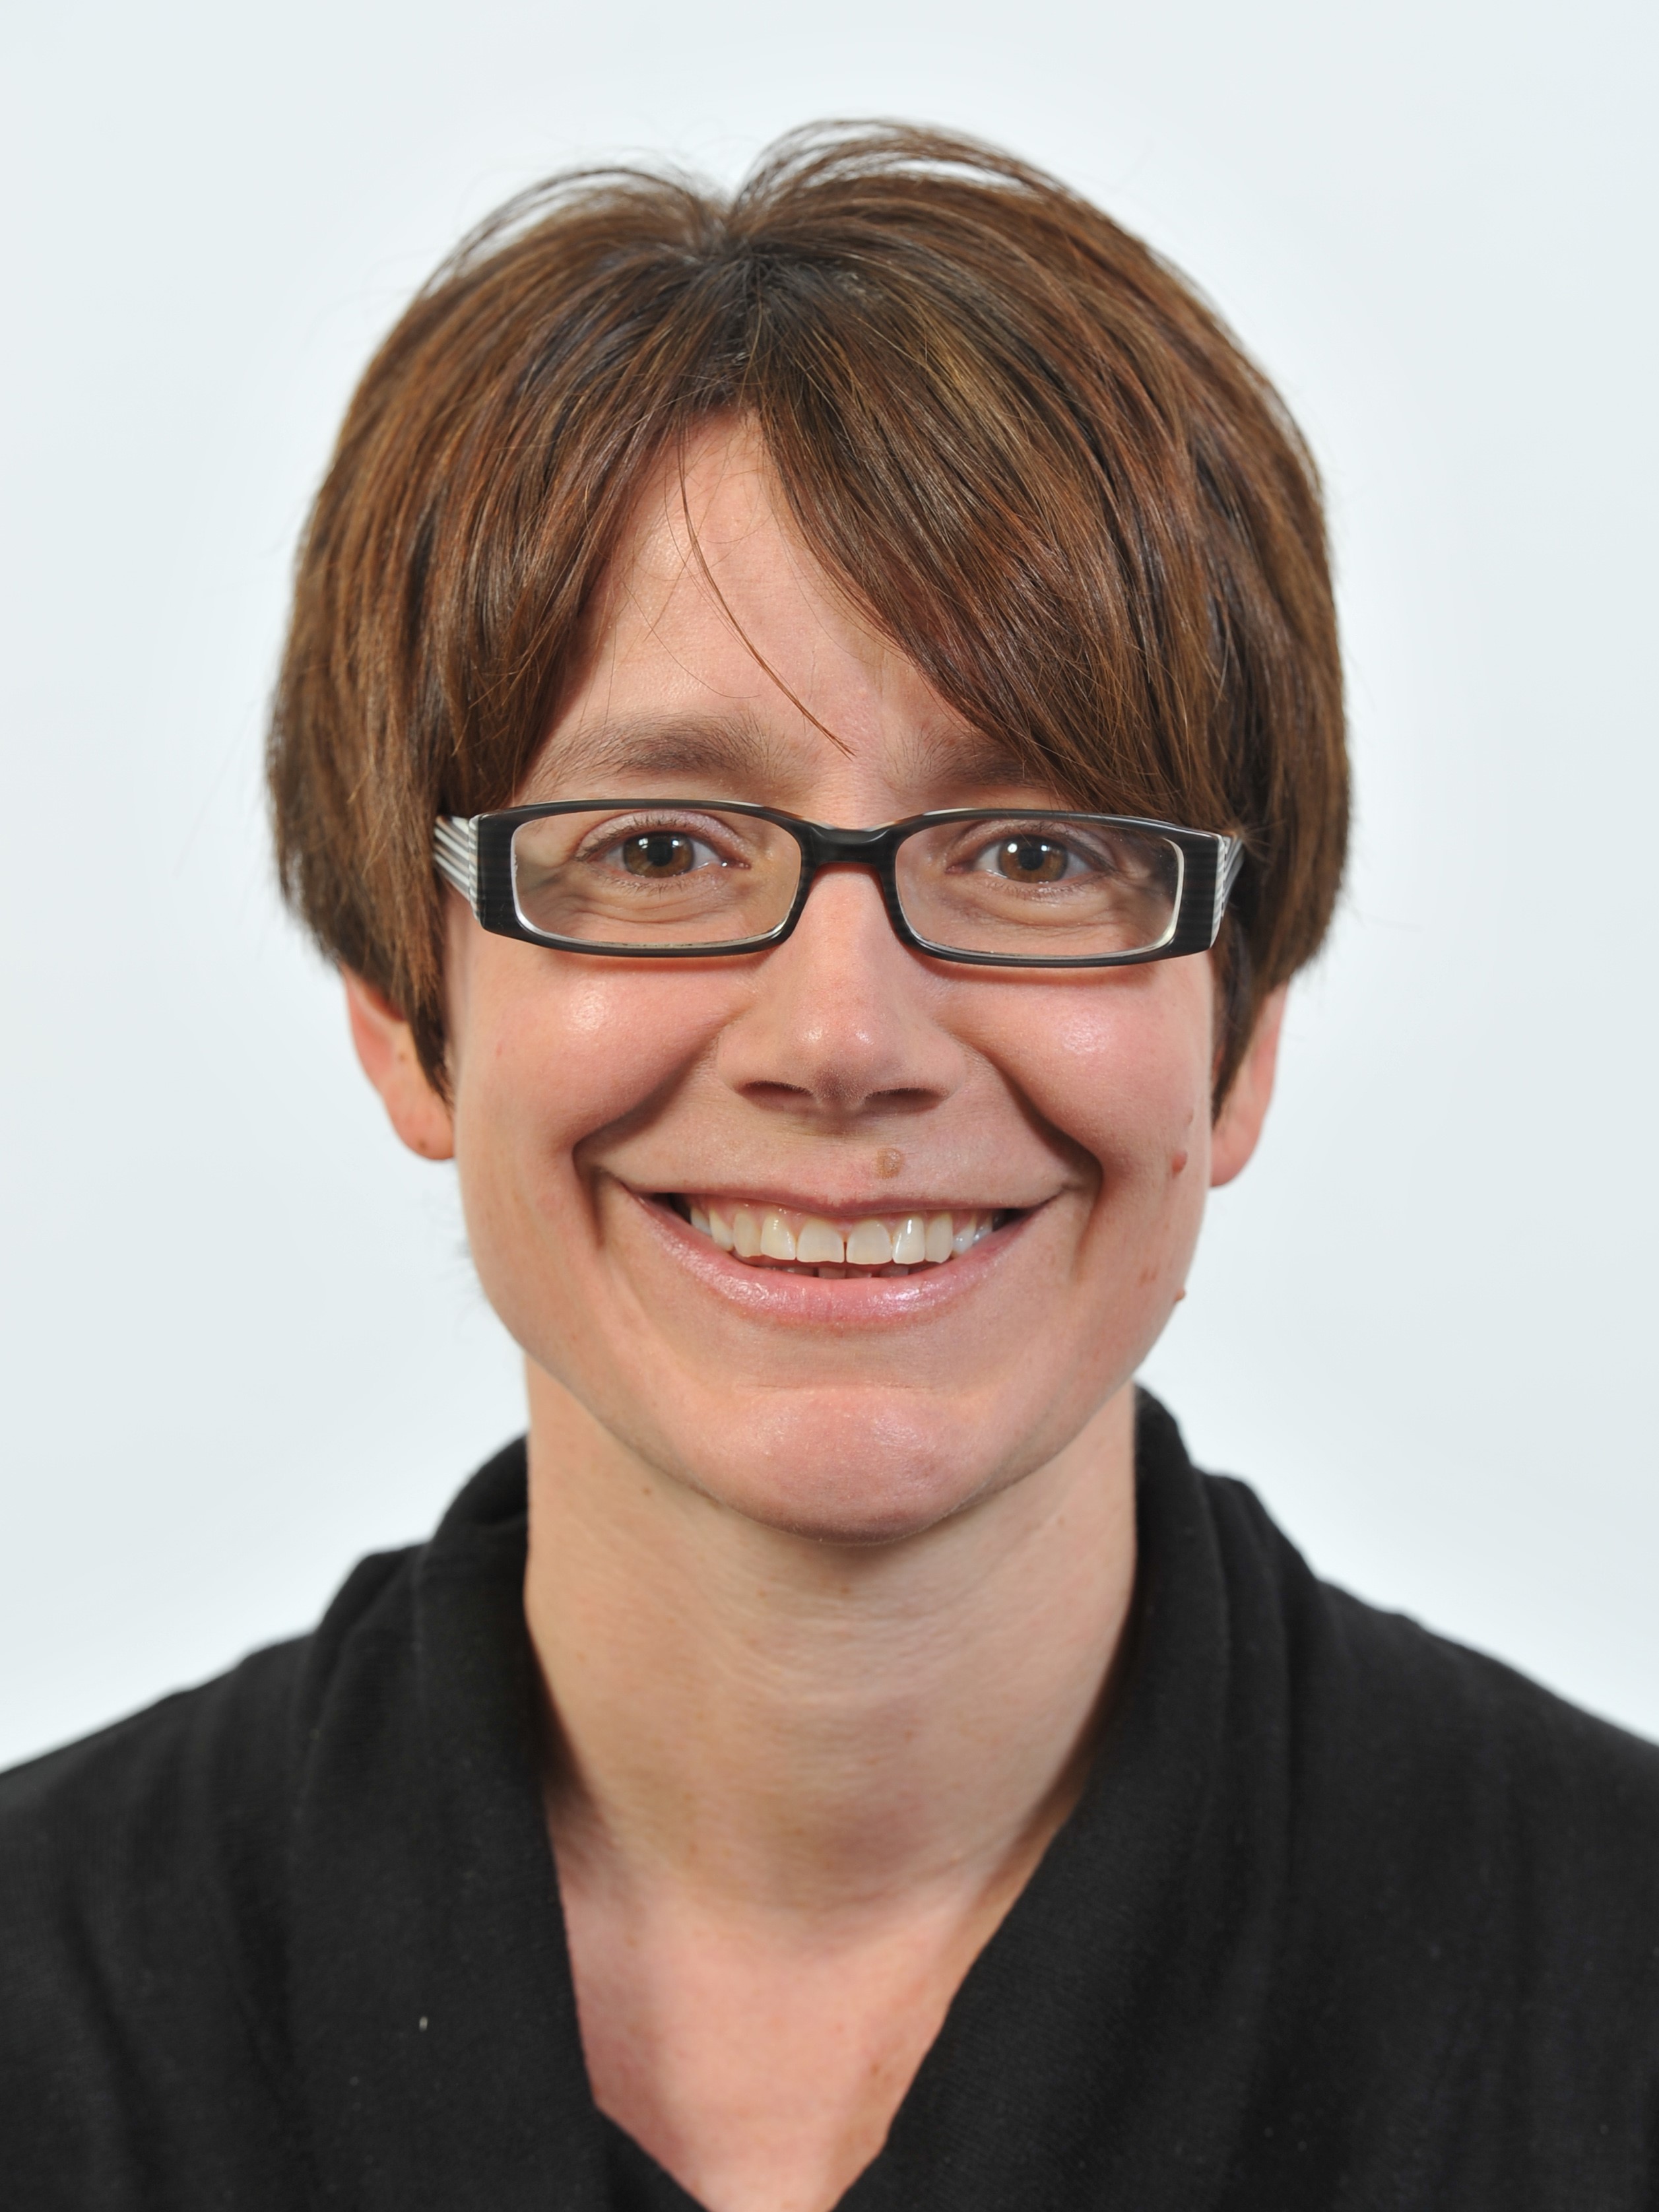 Isabelle Mareschal, Reader in Psychology and Head of Psychology Department, Queen Mary University of London